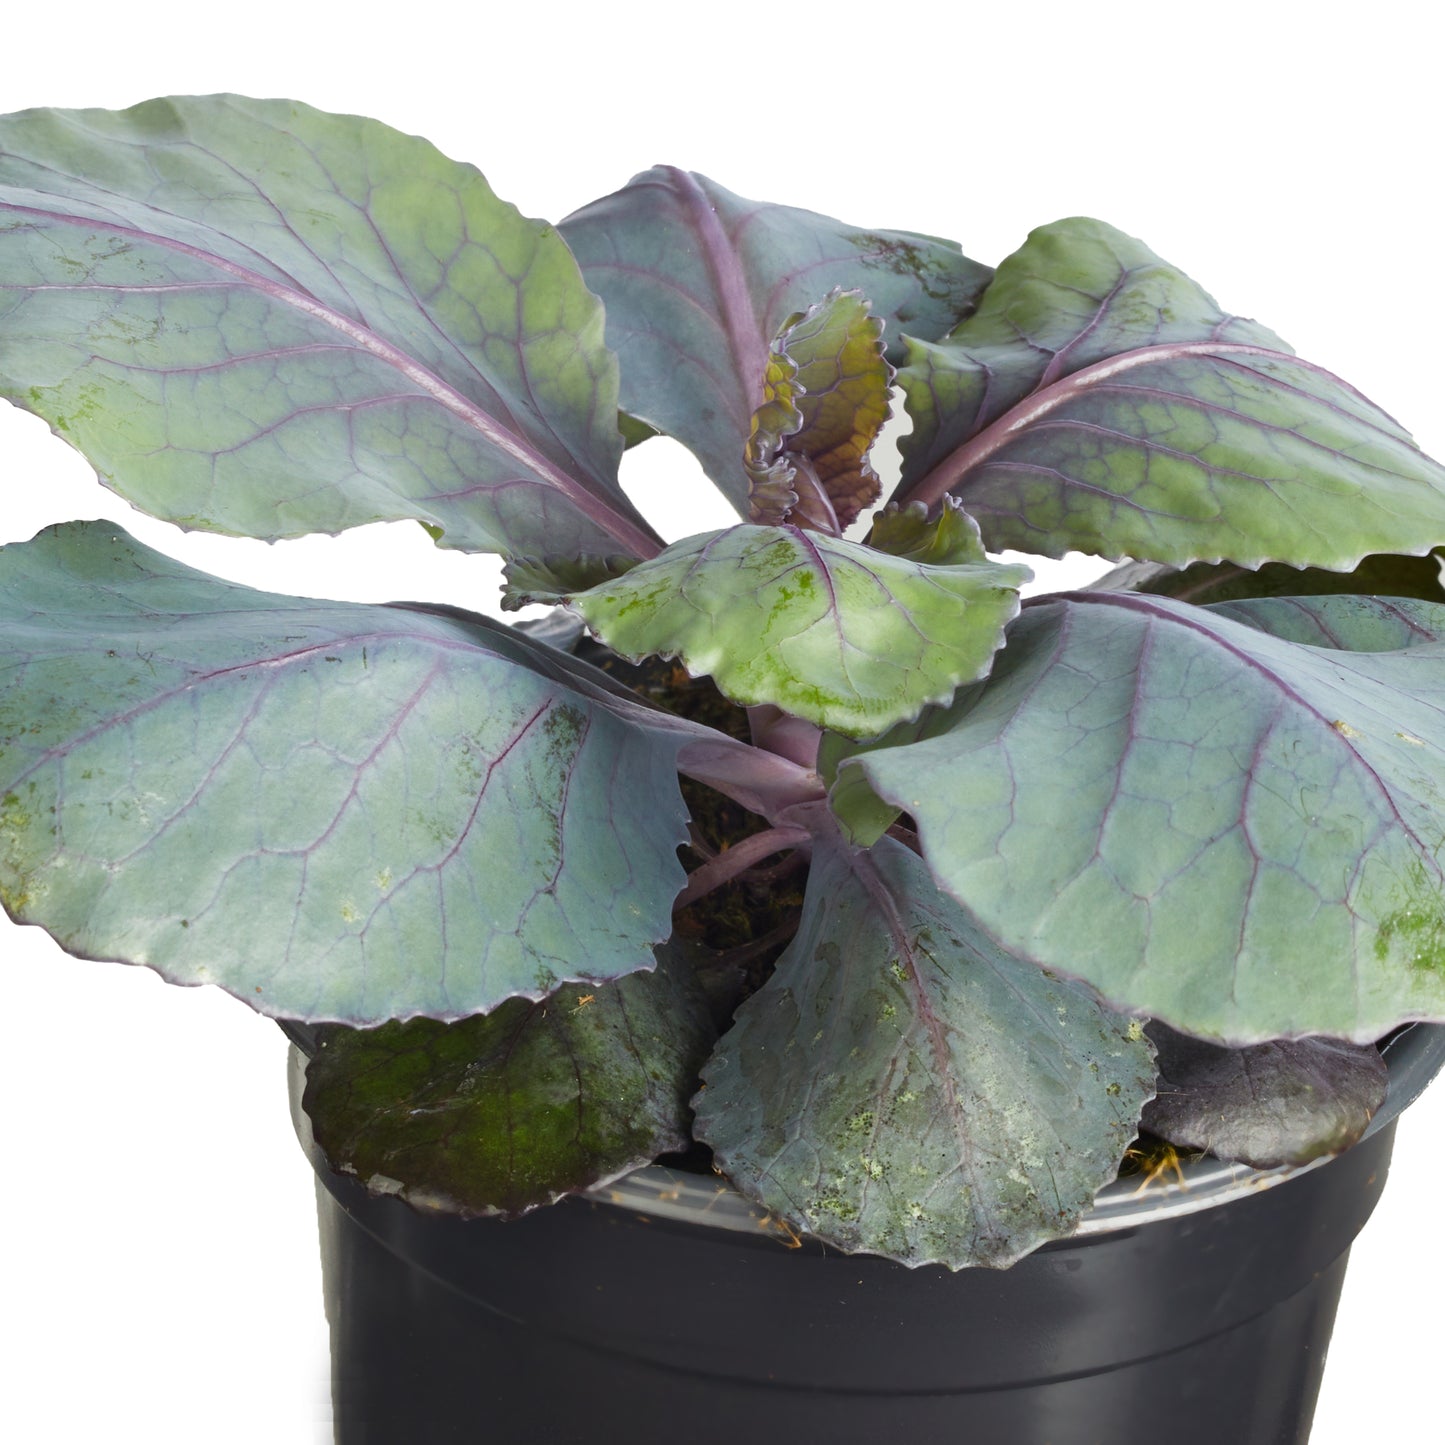 Cabbage Ruby Perfection Plantlings Plus Live Baby Plants 4in. Pot, 2-Pack